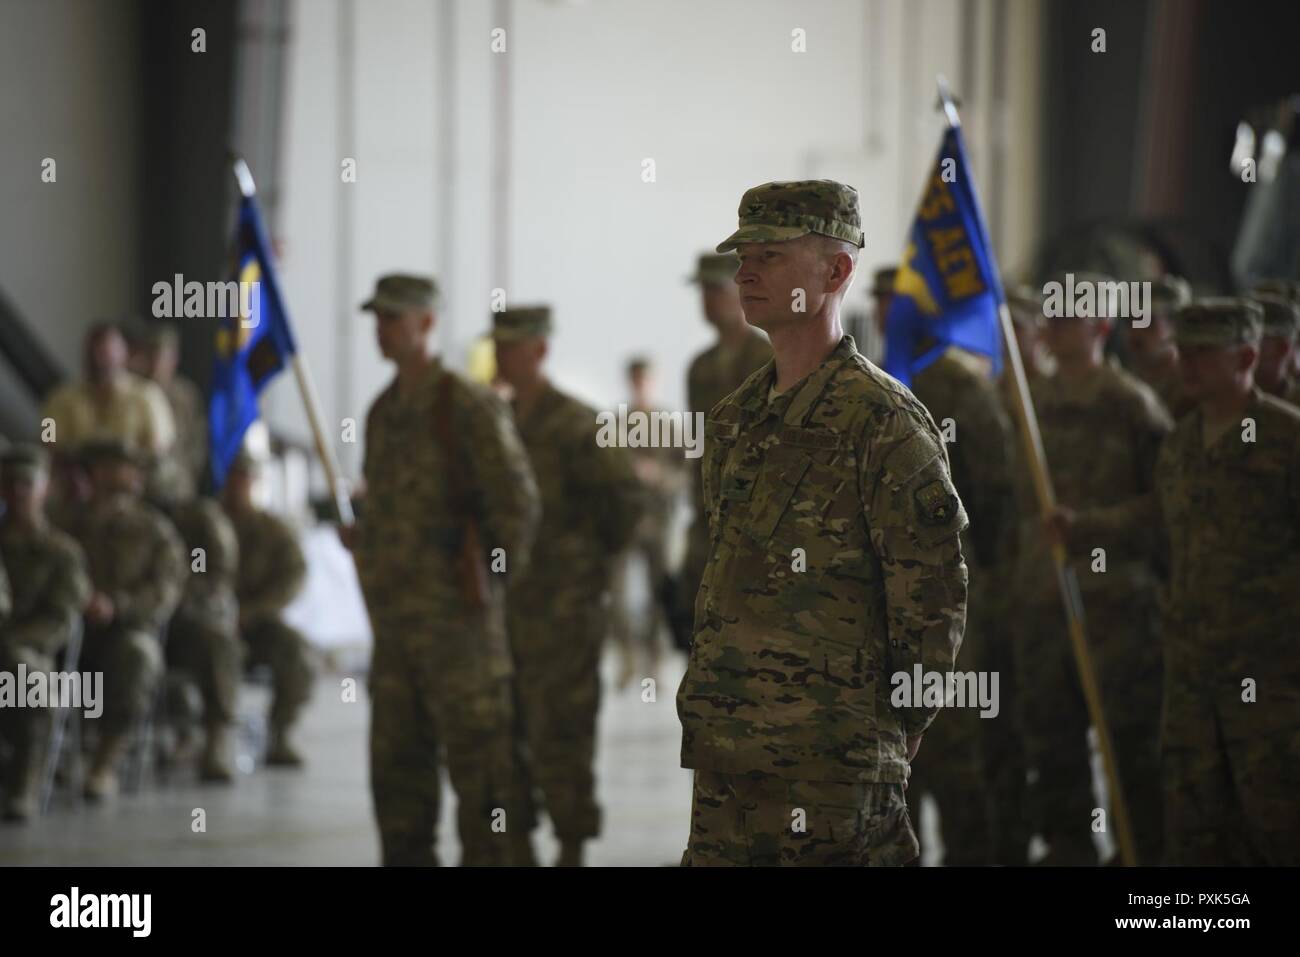 Col. William Burks, the 455th Air Expeditionary Wing vice commander, stands in formation during a change of command ceremony at Bagram Airfield, Afghanistan, June 3, 2017. Bagram Airfield welcomed its new commander, Brig. Gen. Craig Baker. Stock Photo